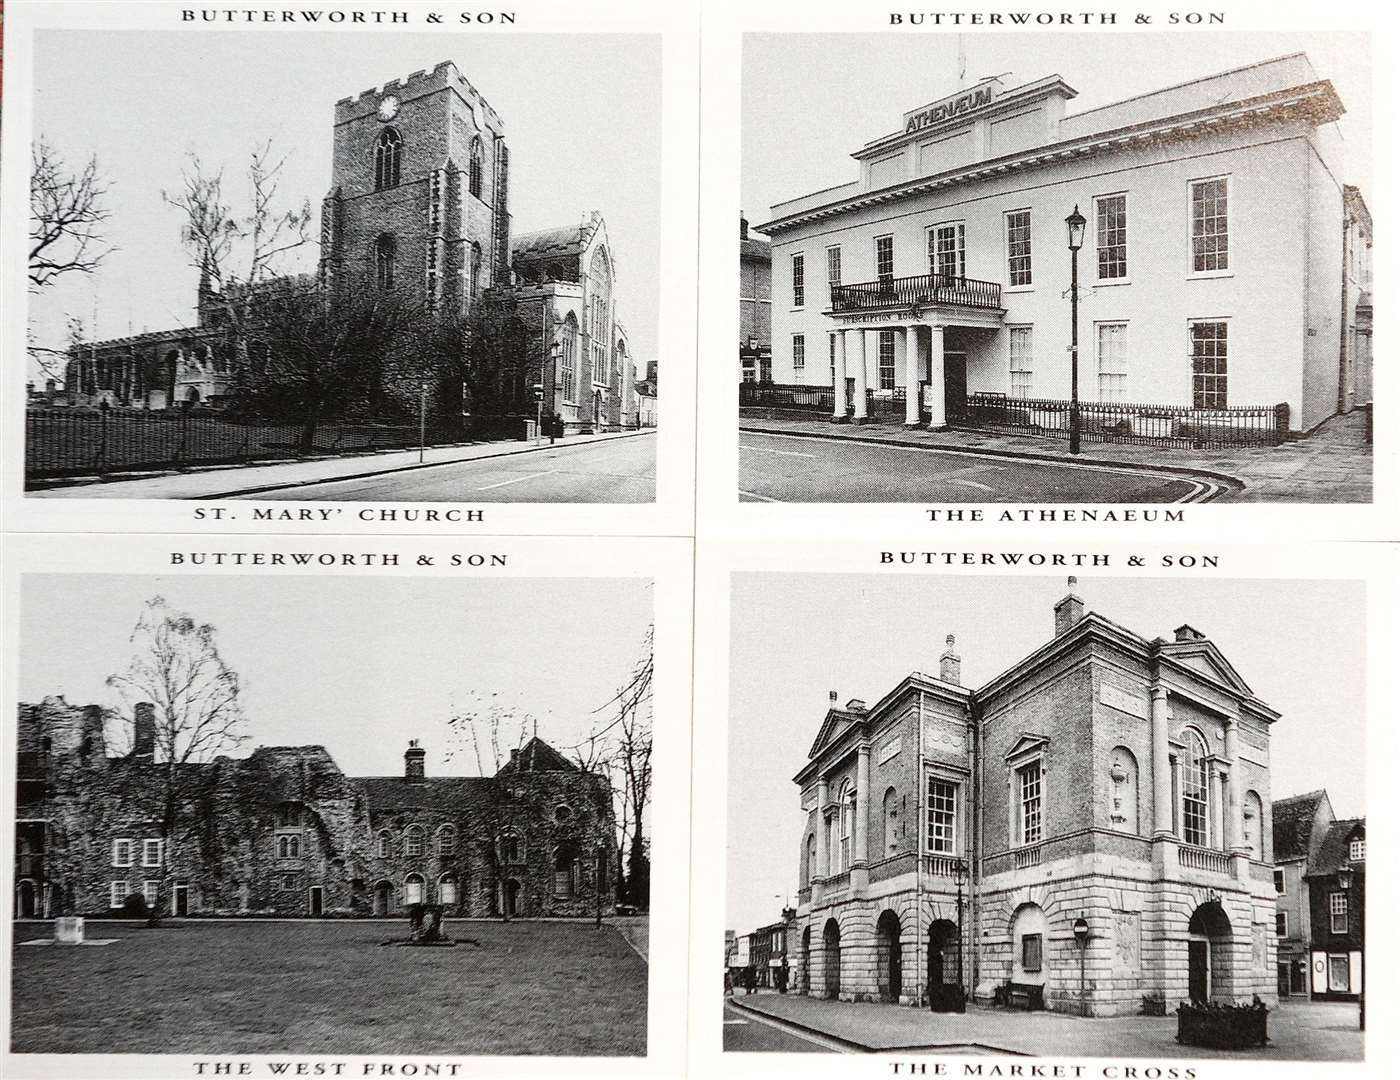 The very first set of cards featured photographs of Bury St Edmunds